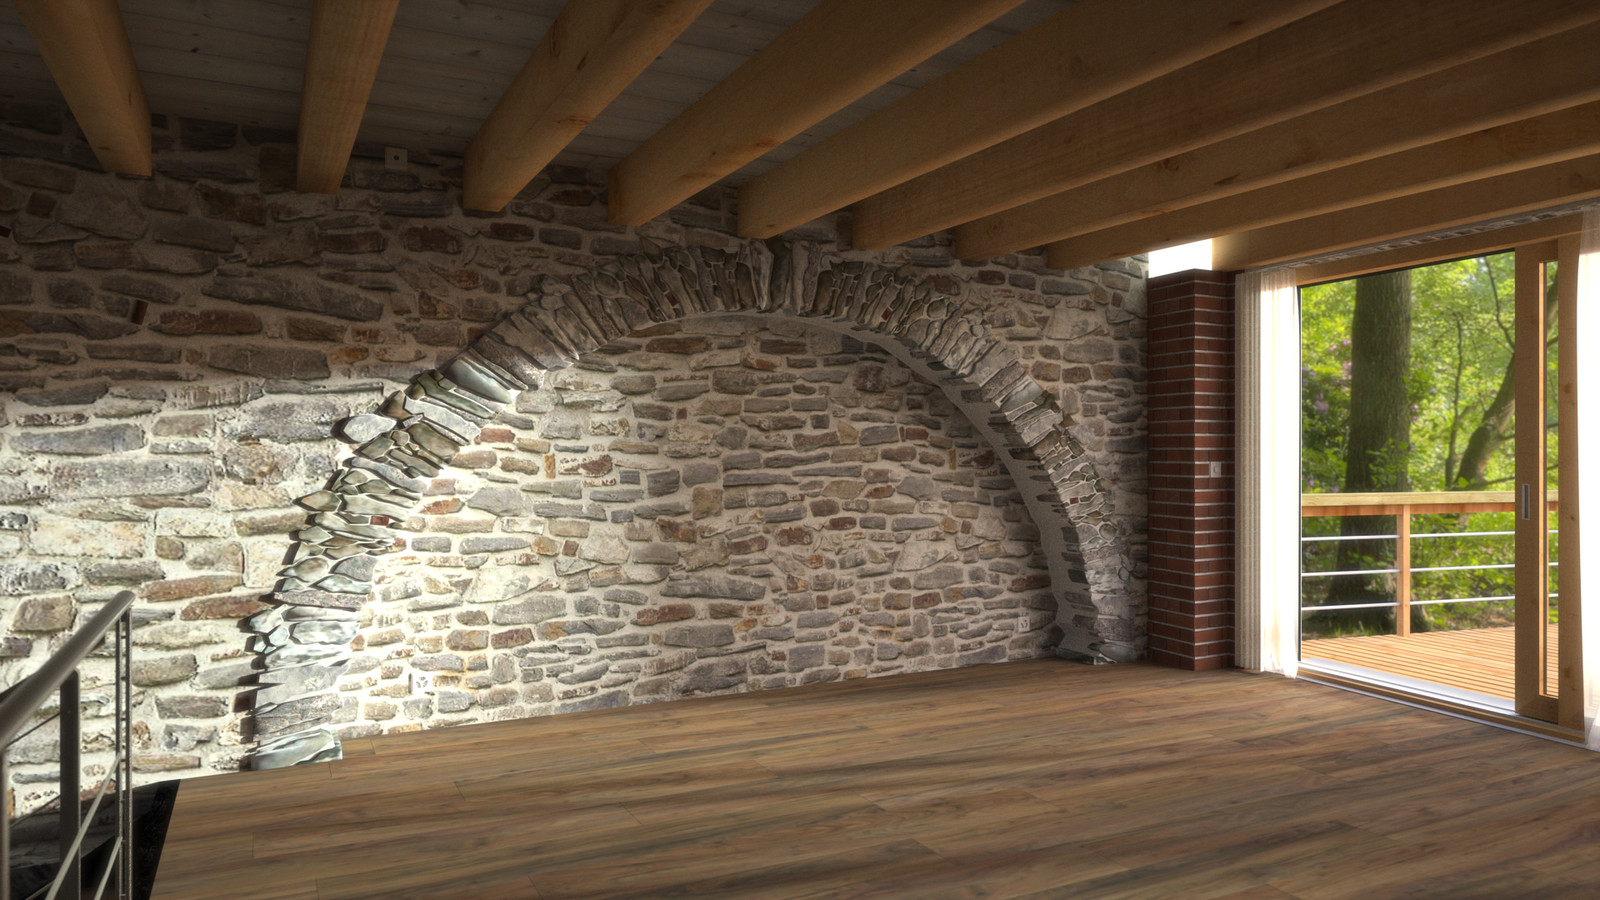 Complete, integrated with background
Rivendell Salon Arch Demo-Scene 138